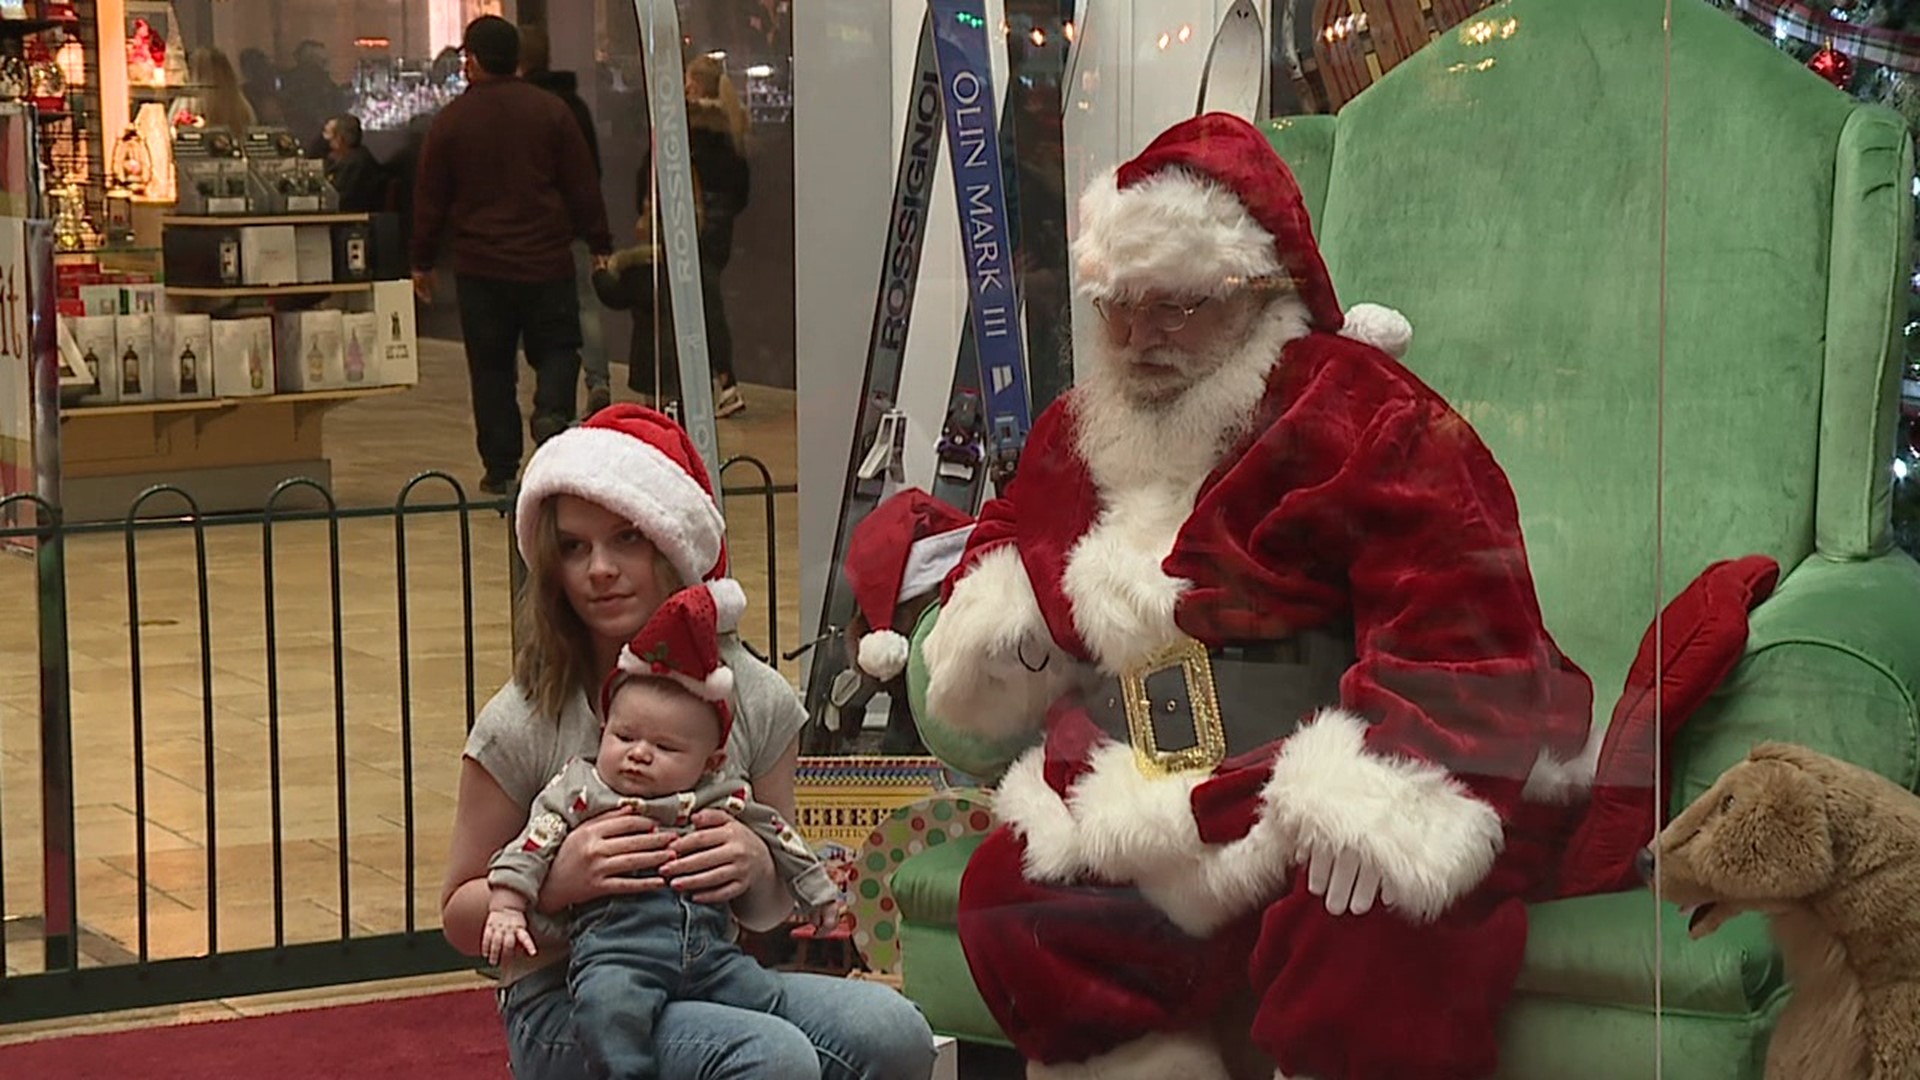 Want to meet Santa Claus? You'll need reservations first